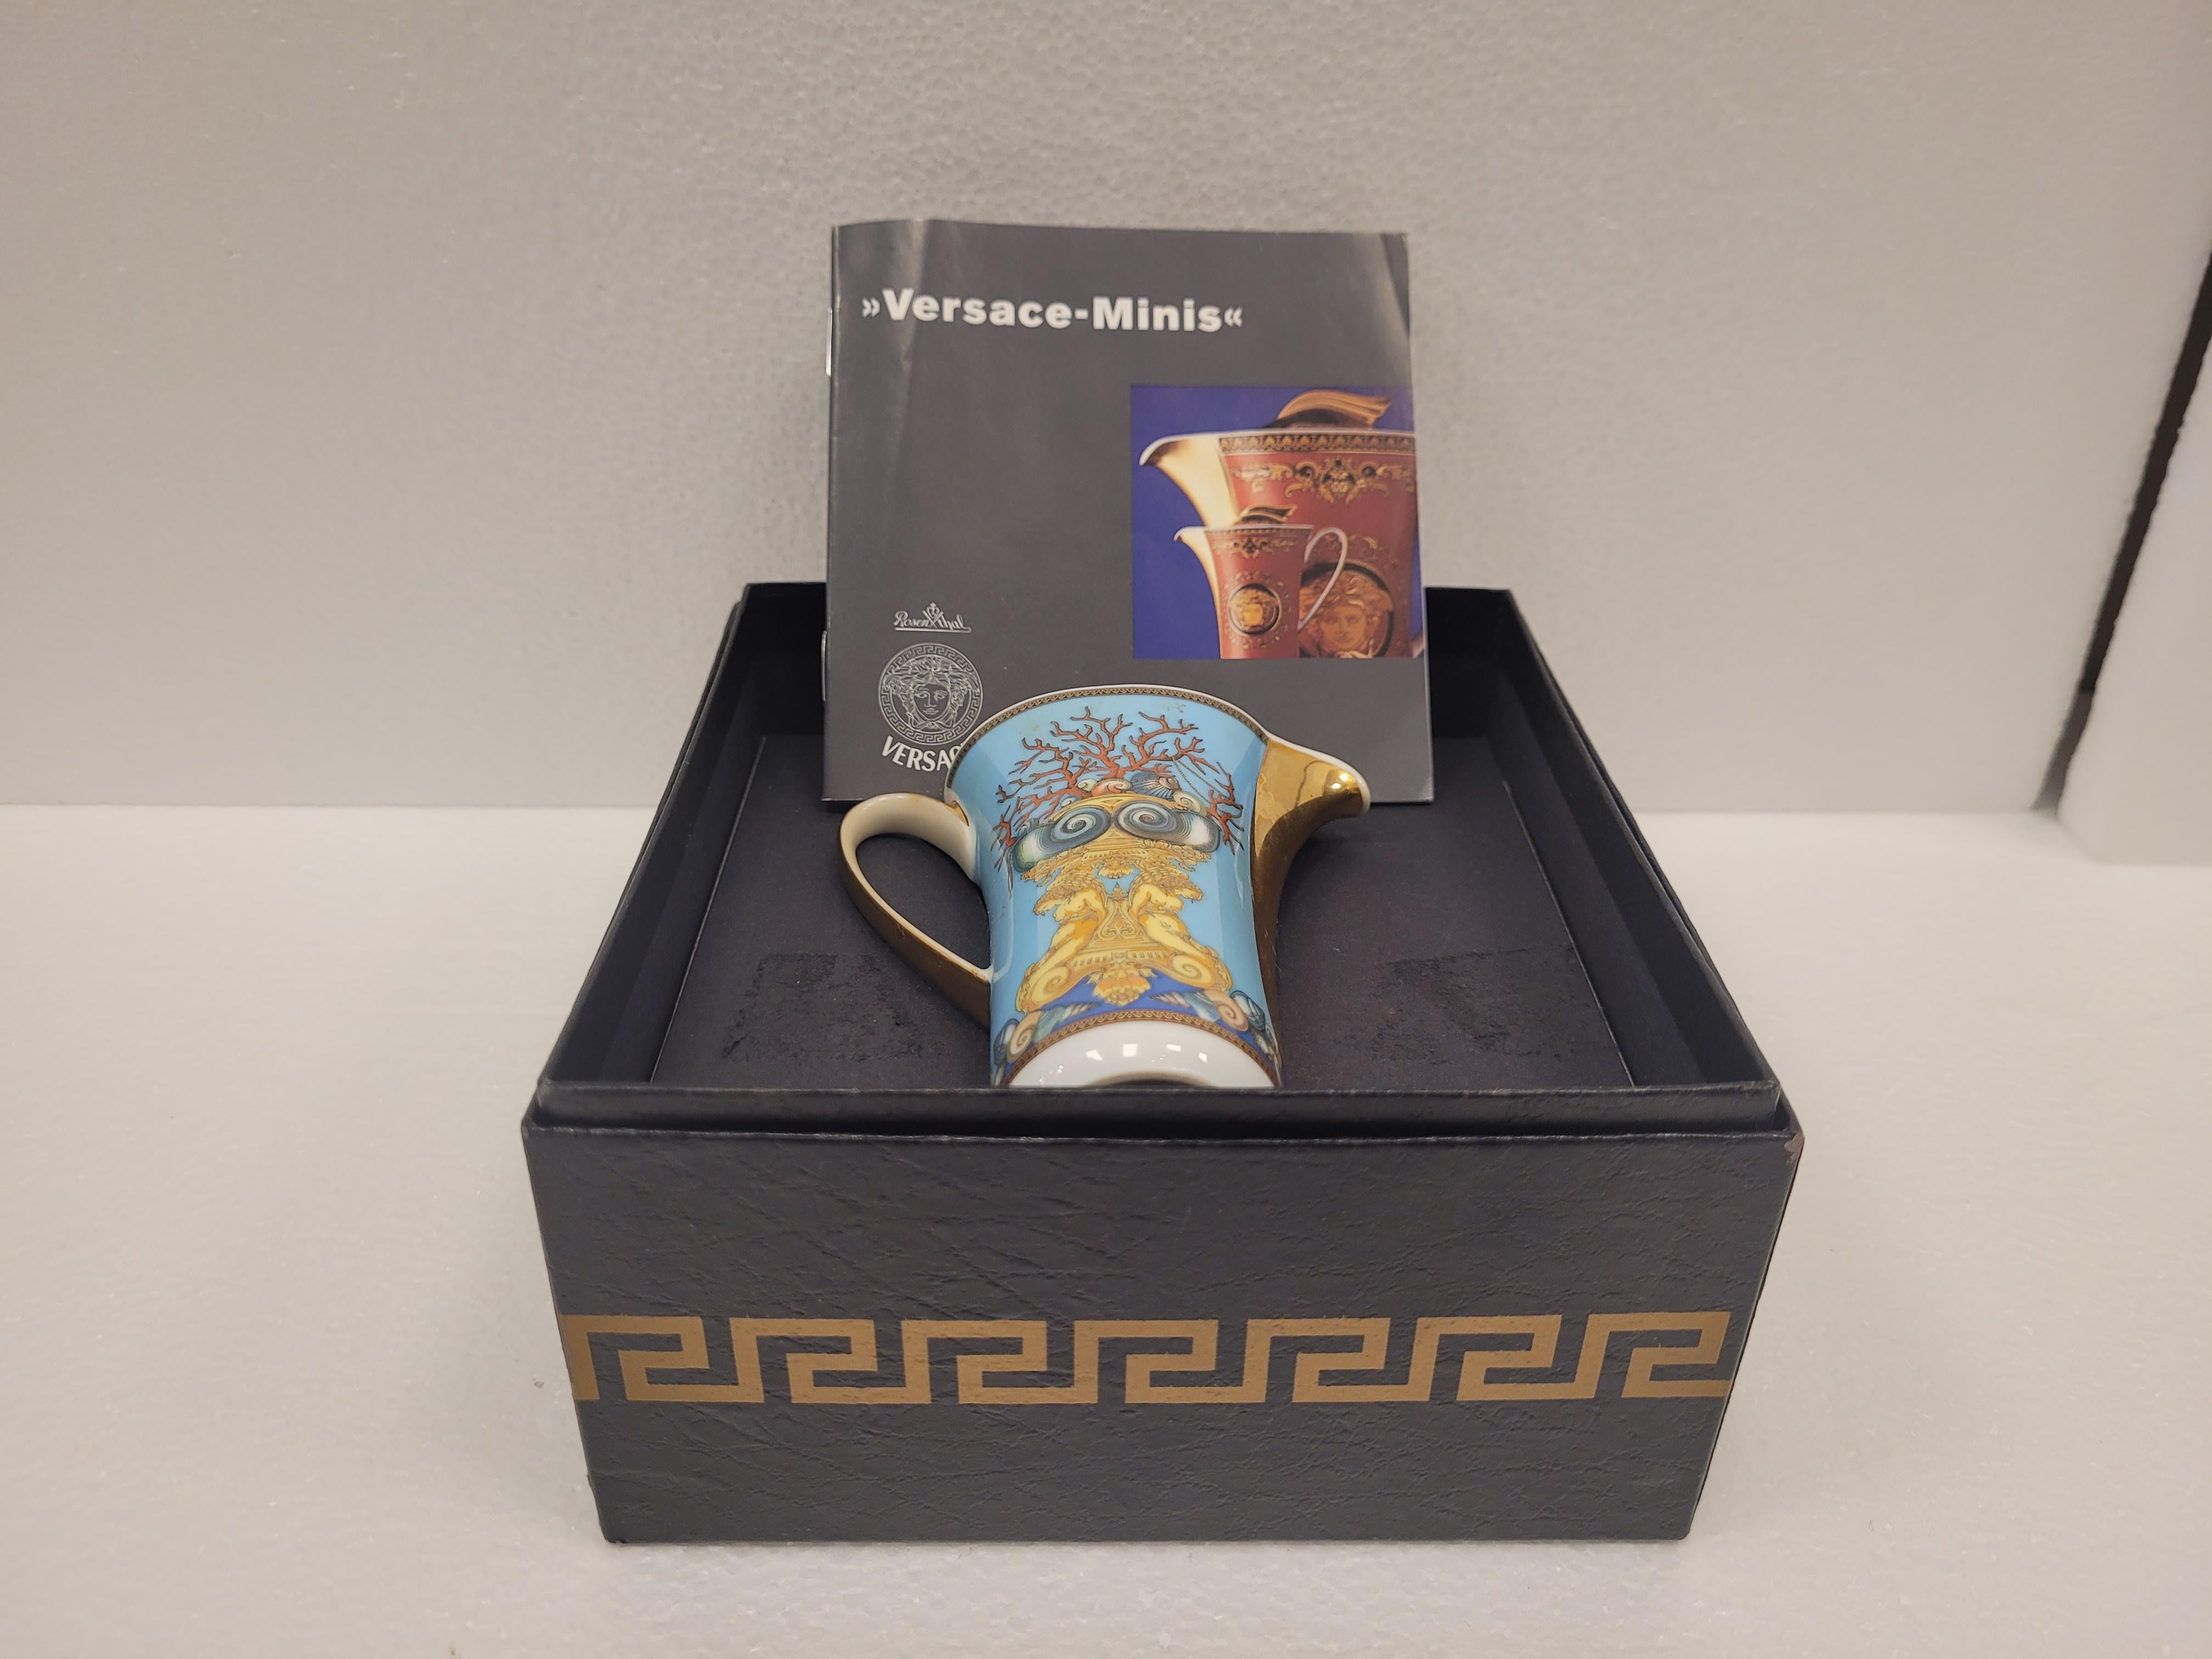 Gorgeous Porcelain jug designed by Versace for Rosenthal, with baroque motifs of gorgonians and nautilus typical of Versace in blue and gold. In its original box and perfect condition for its age and use.
a beautiful collector's piece designed by